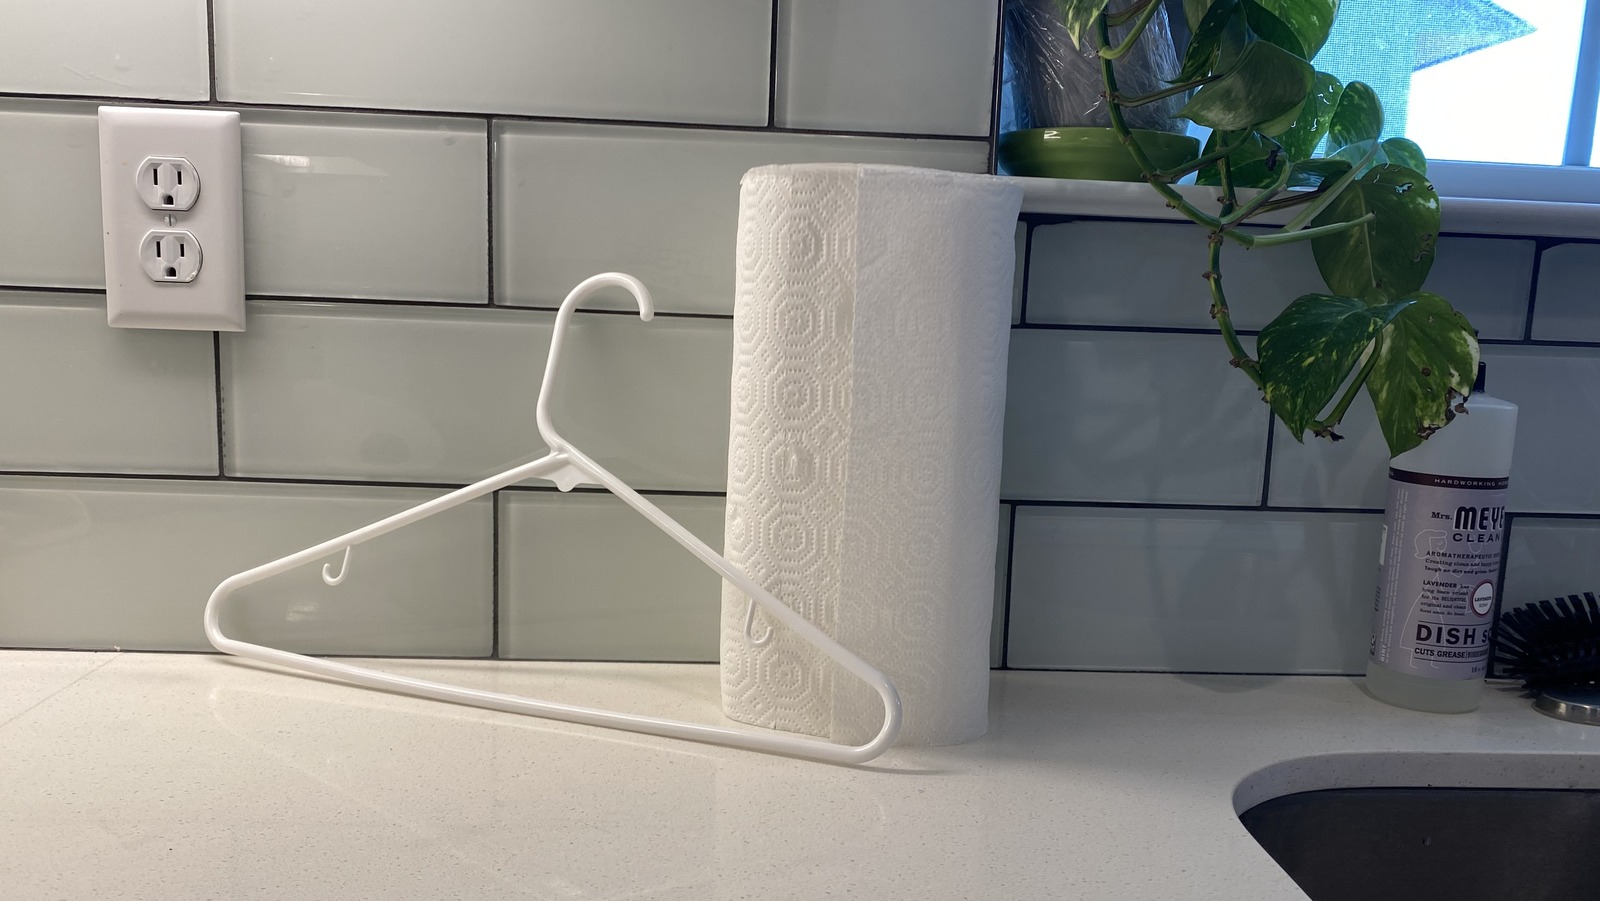 https://www.housedigest.com/img/gallery/we-tried-the-coat-hanger-as-a-paper-towel-holder-hack-and-we-can-roll-with-these-two-perks/l-intro-1686608336.jpg